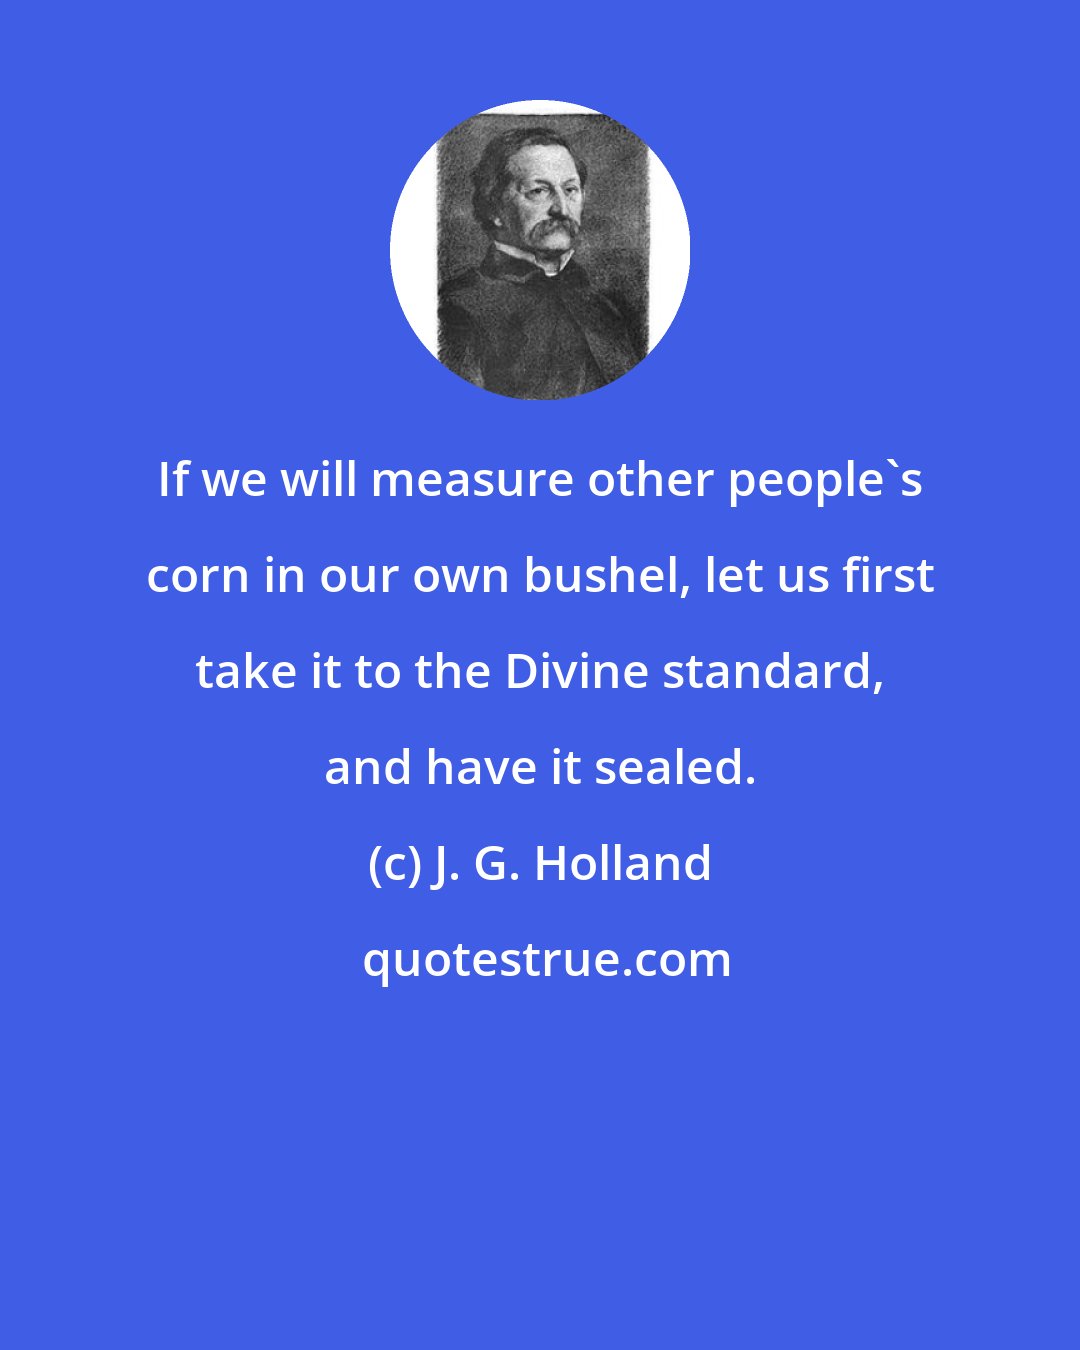 J. G. Holland: If we will measure other people's corn in our own bushel, let us first take it to the Divine standard, and have it sealed.